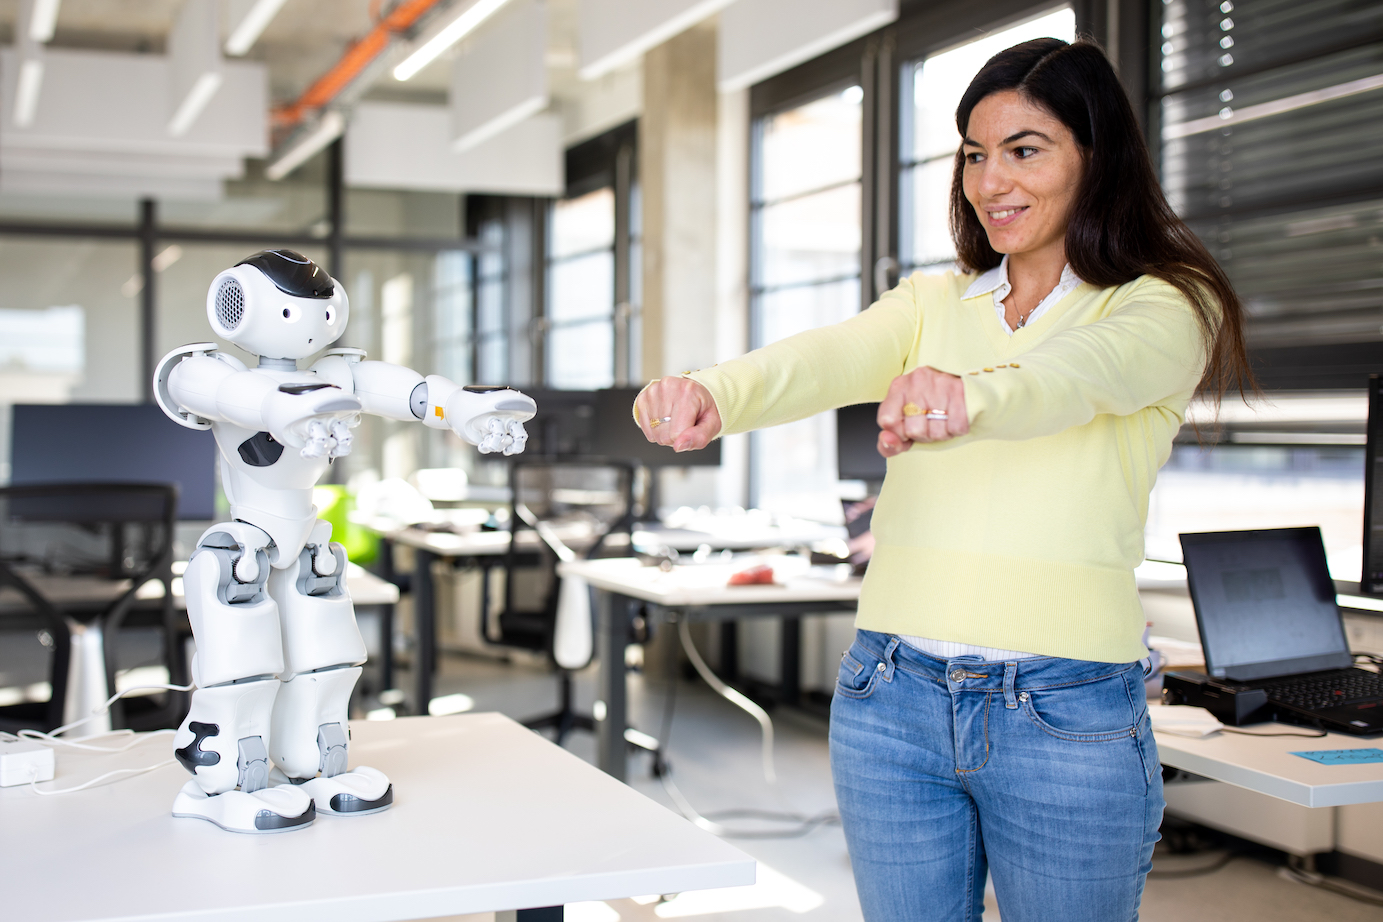 Doris Pischedda on human-robot interactions, robot emotions, and her new Q-Team course